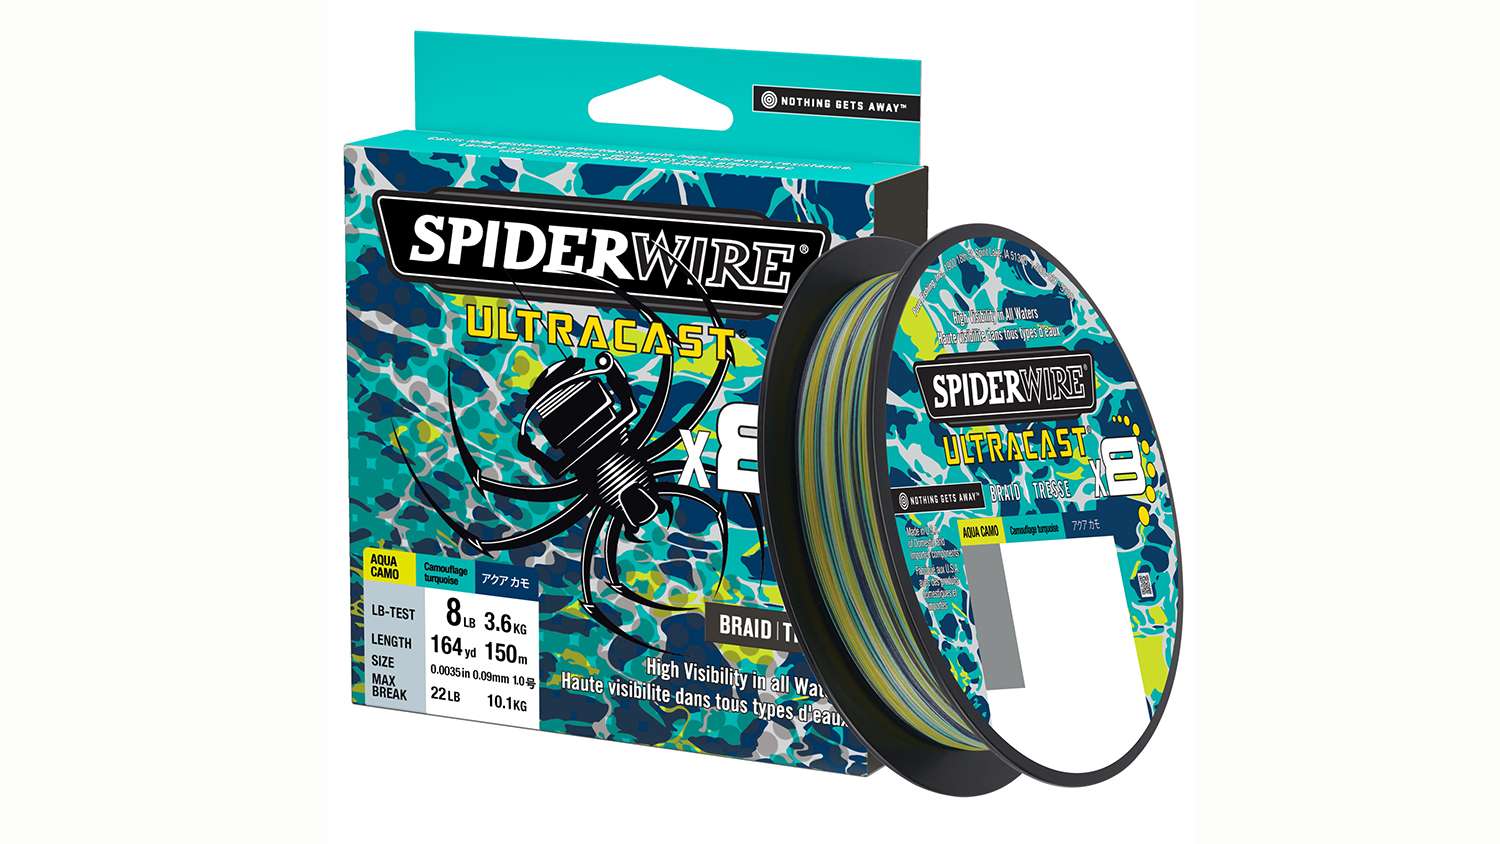 Linha Spider Wire Ultracast 8lbs 183mts